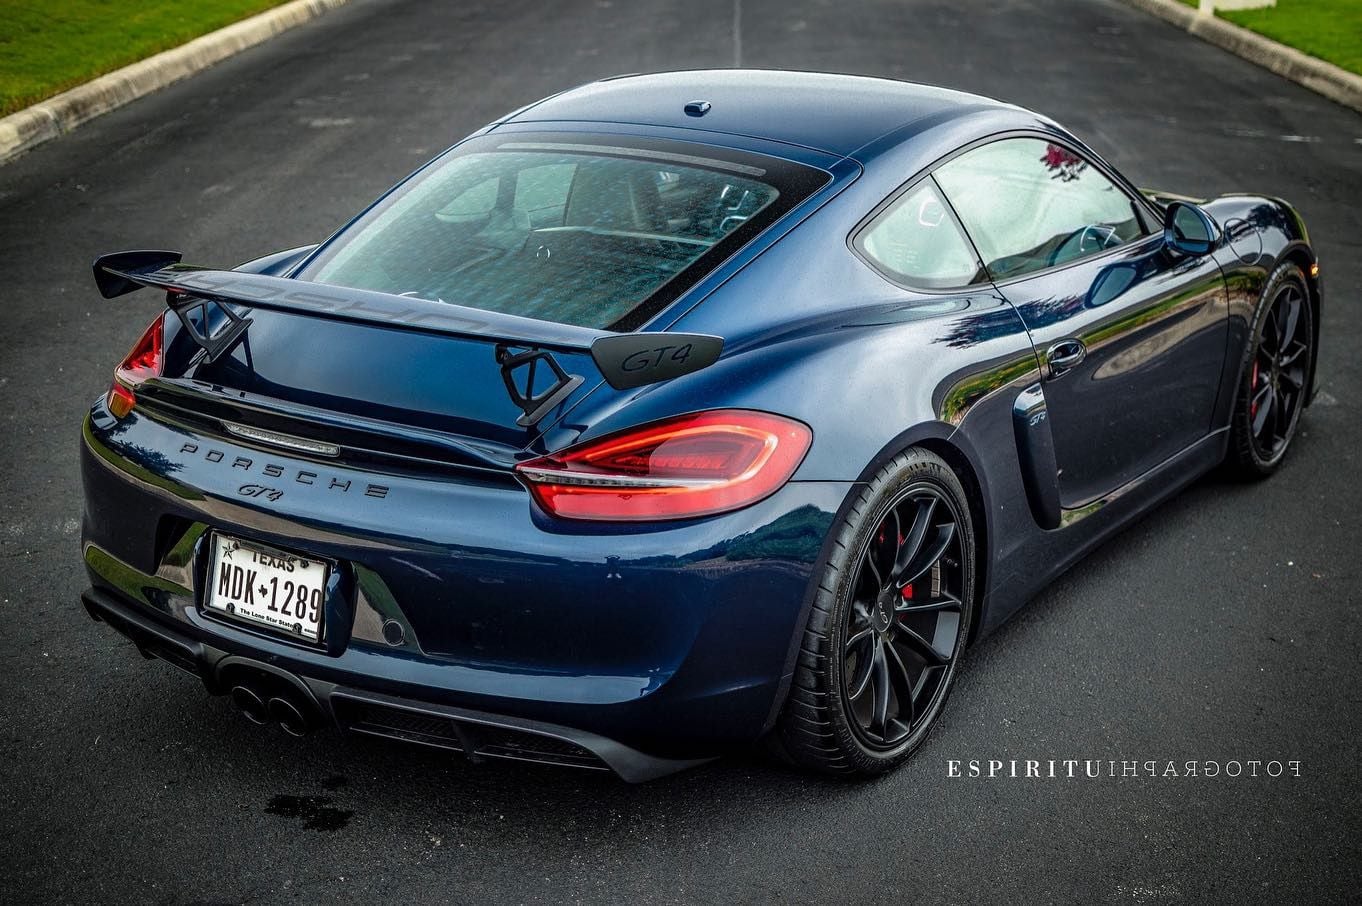 2016 Porsche Cayman GT4 - Rare color -  dark blue metallic gt4 - Used - VIN WP0AC2A80GK197388 - 7,800 Miles - 6 cyl - 2WD - Manual - Coupe - Blue - Boerne, TX 78015, United States